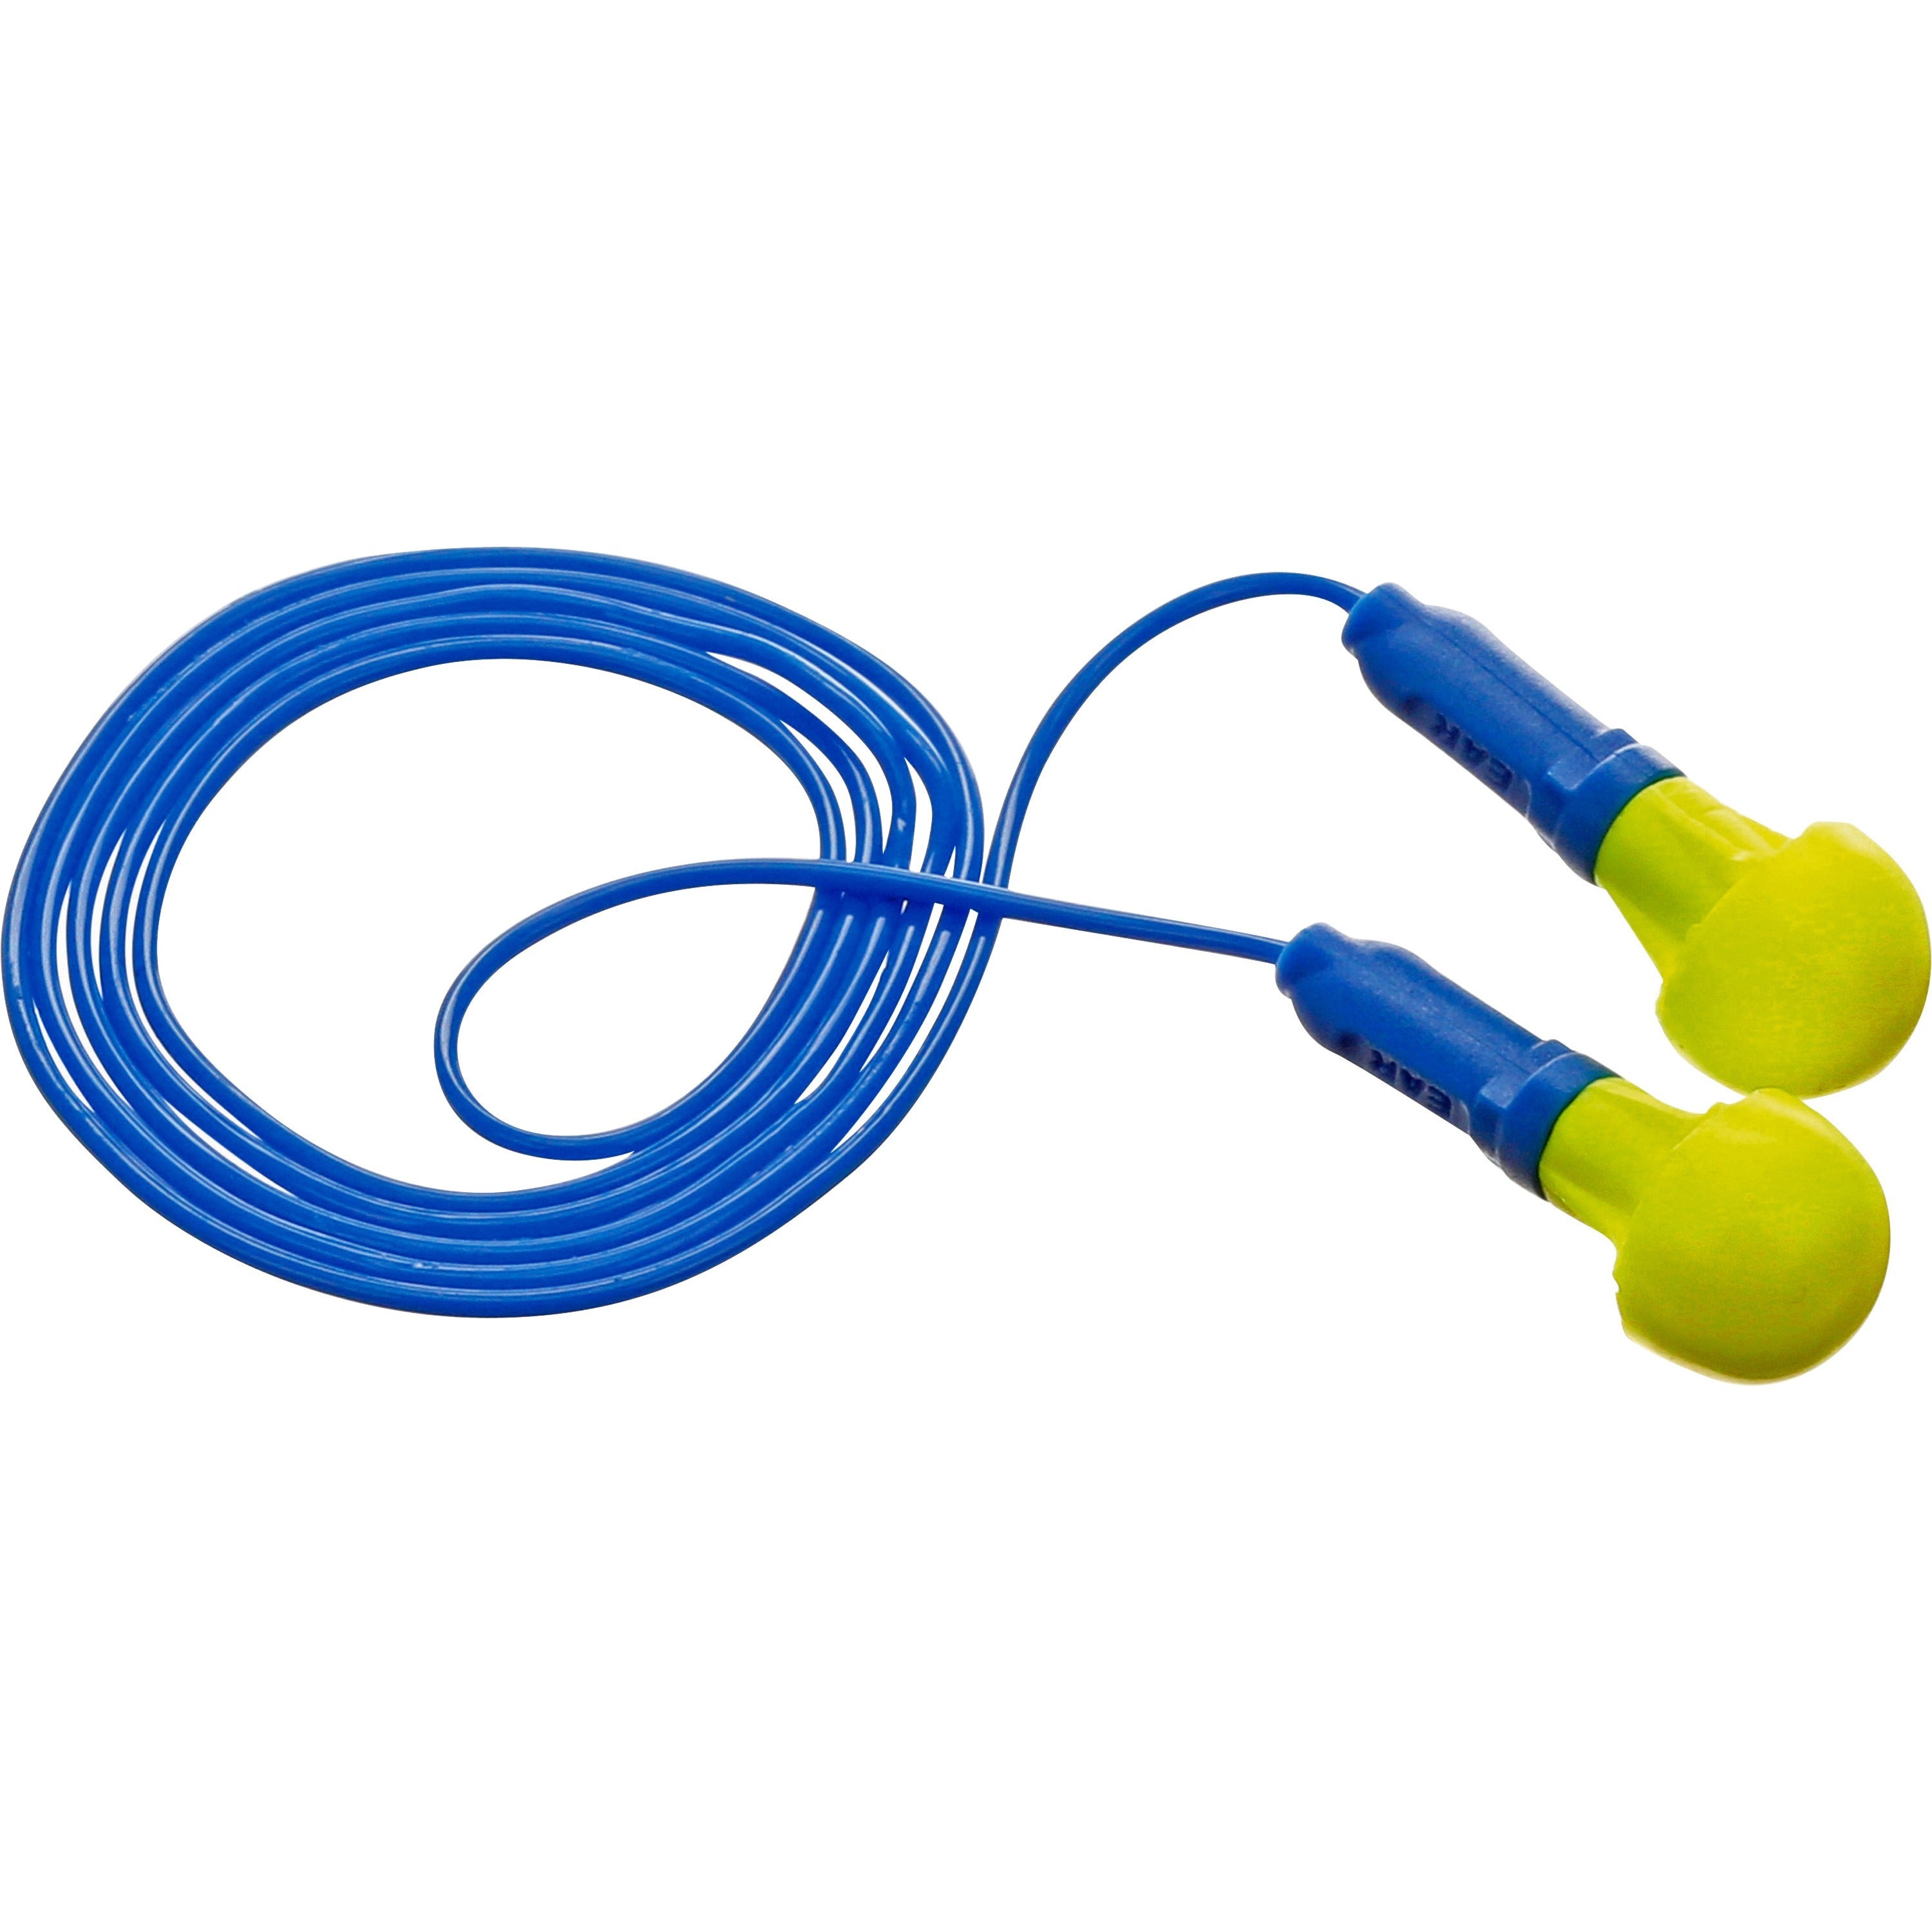 e-a-r-push-ins-corded-earplugs-noise-protection-foam-polyurethane-yellow-corded-comfortable-disposable-200-box_mmm3181003 - 2